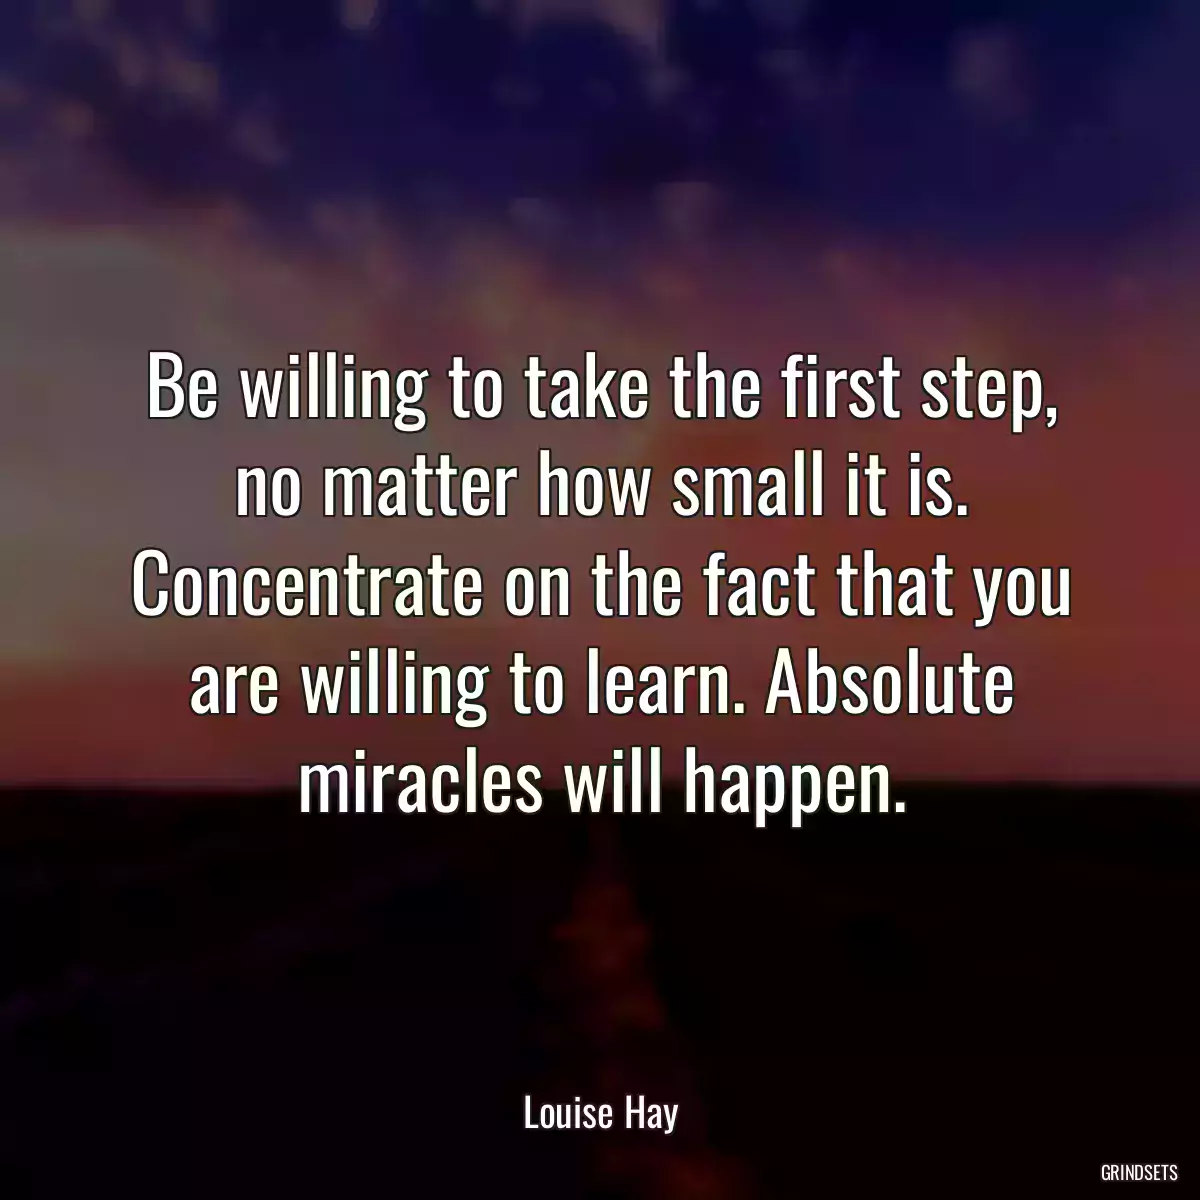 Be willing to take the first step, no matter how small it is. Concentrate on the fact that you are willing to learn. Absolute miracles will happen.